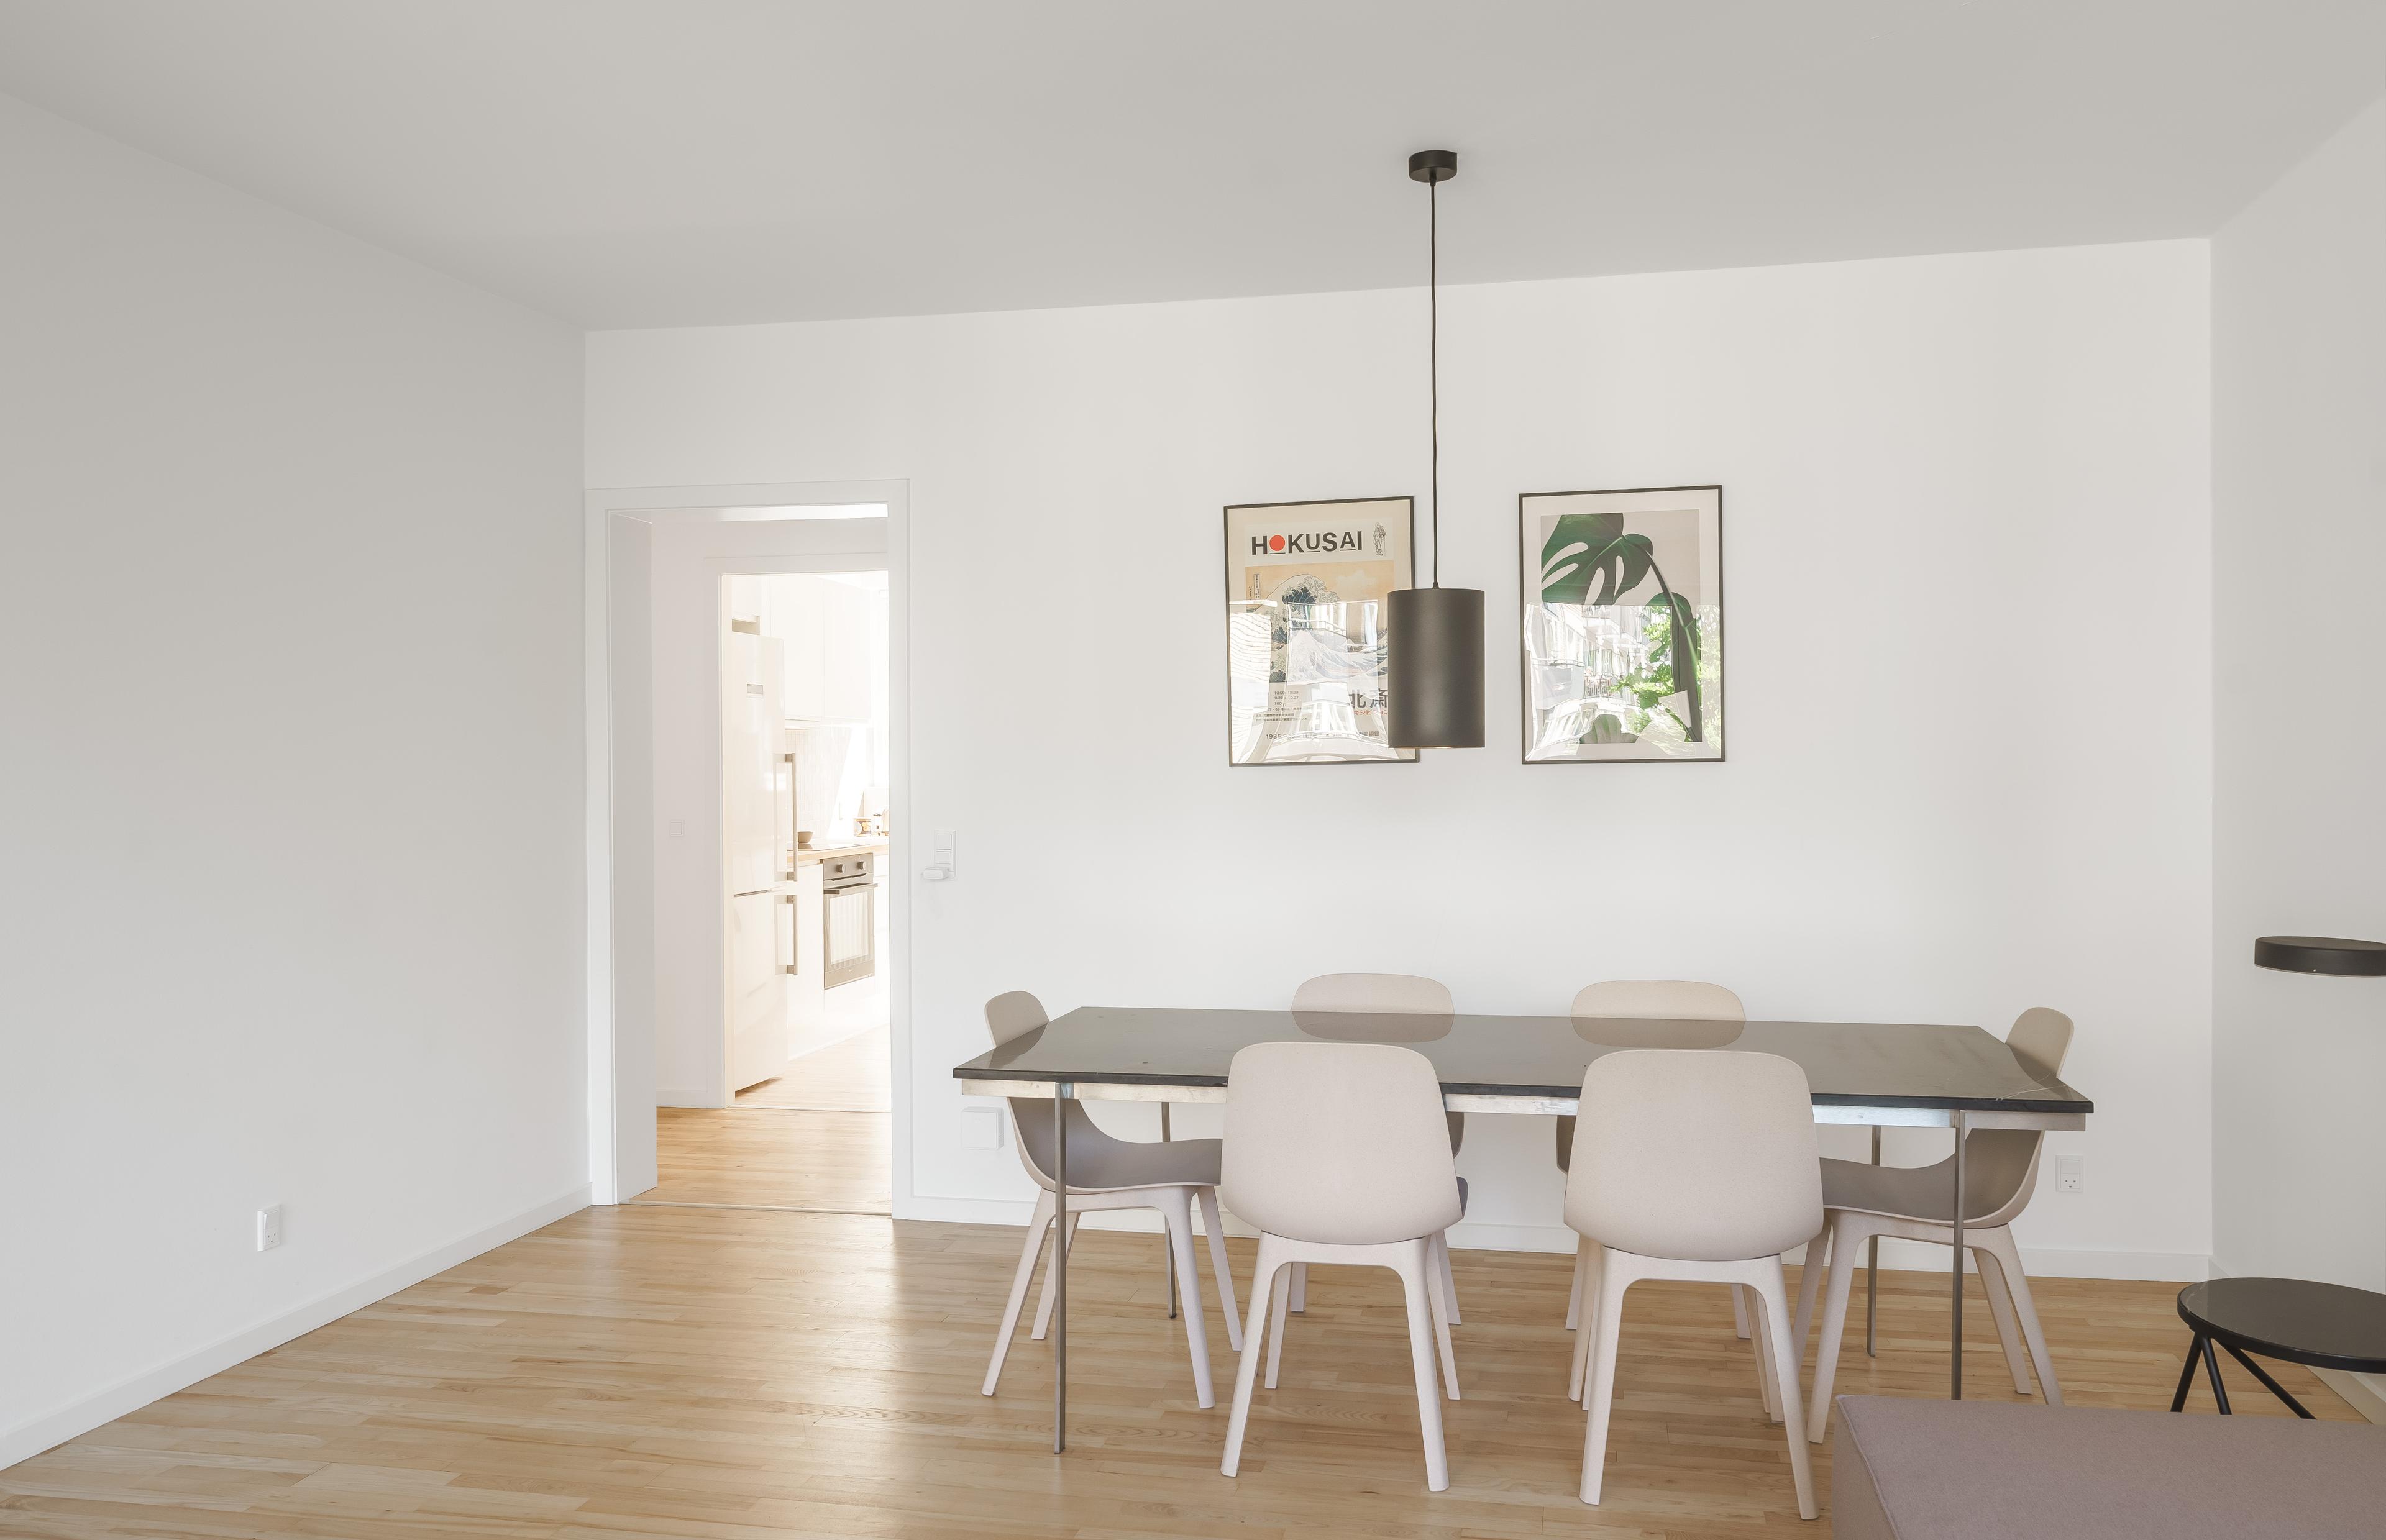 A diningroom with a dining table and a kitchen in the background